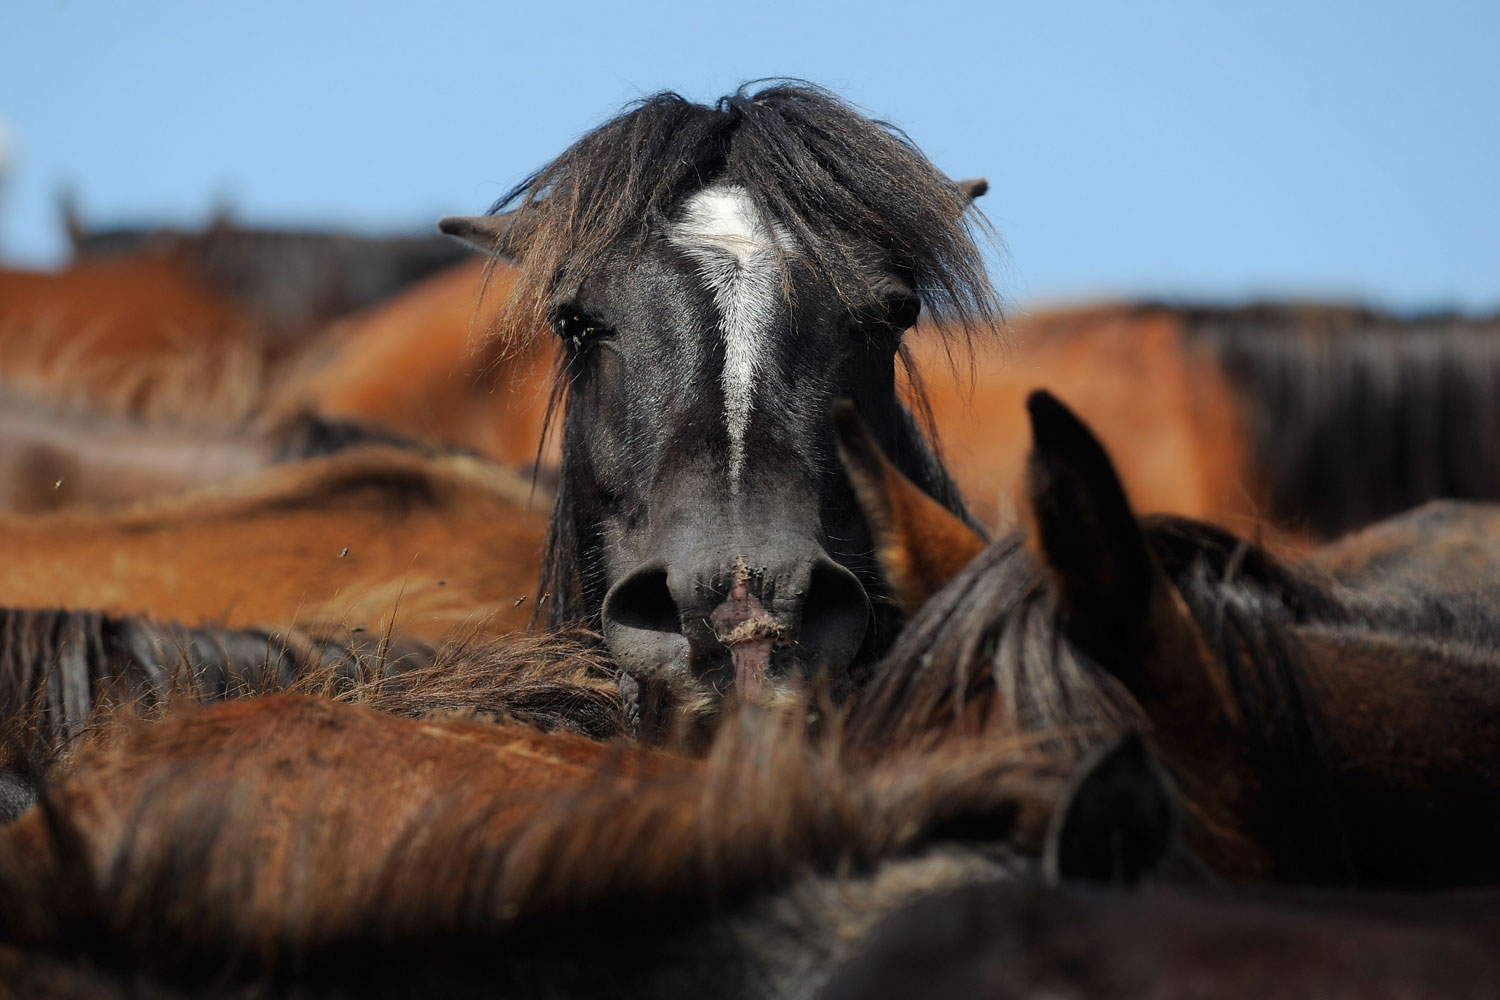 Wild horses are rounded up in the hills on the eve the Rapa das Bestas festival in Sabucedo, Spain. Wild horses are brought down from the mountains in the festival to be tamed in Sabucedo and re-relased to the wilderness with a new micro chip attached.